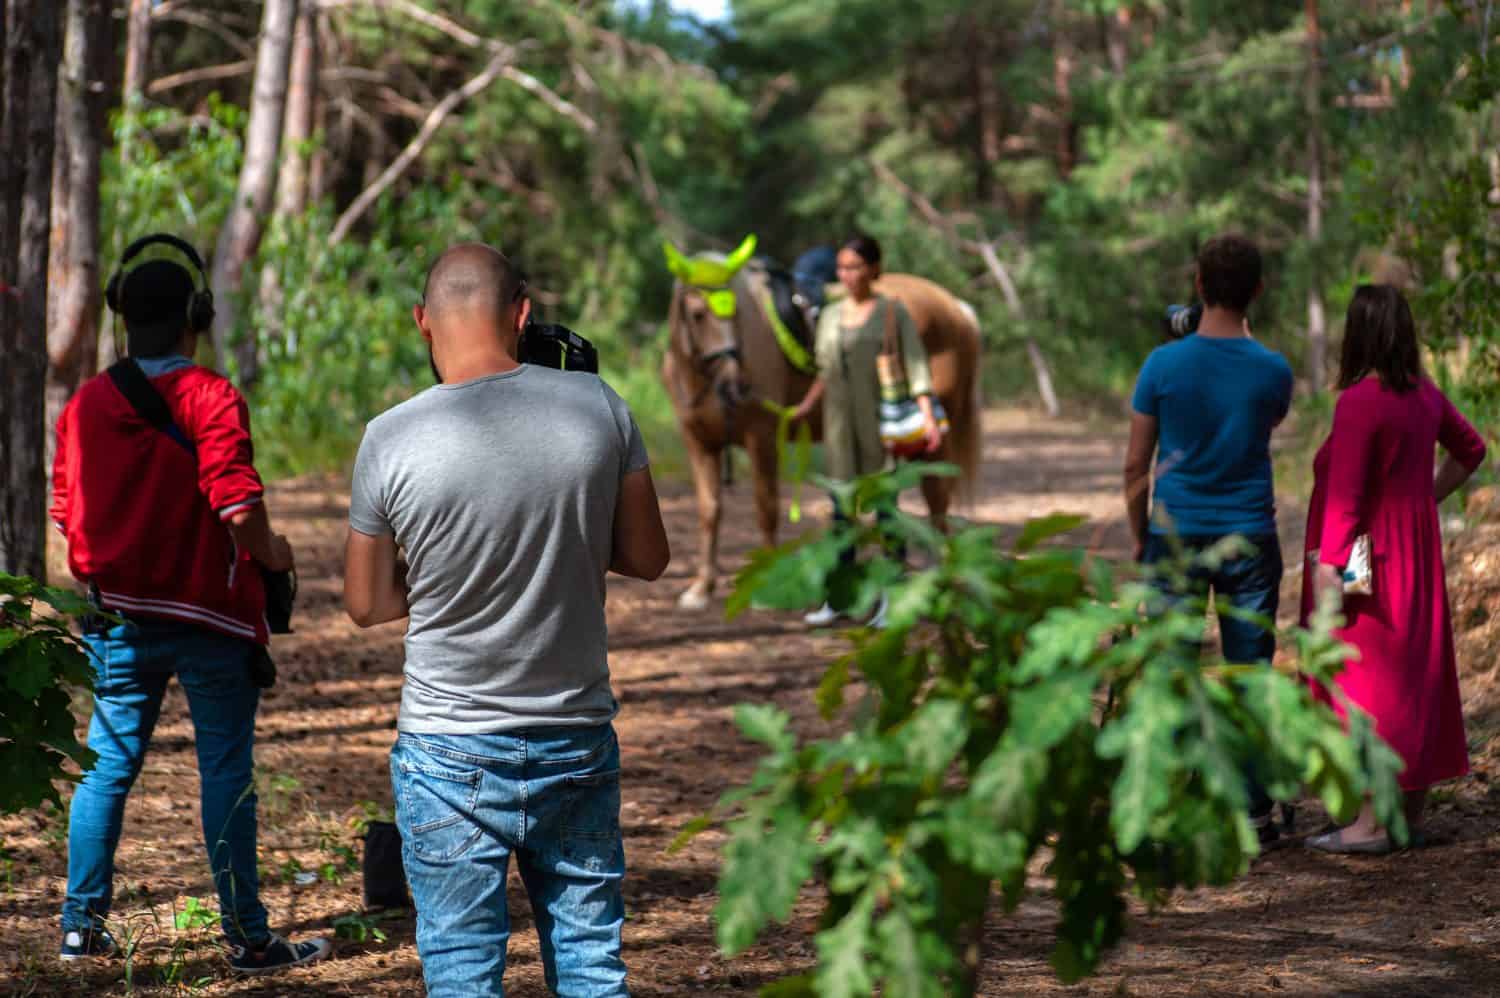 Filmmaking team in forrest doing their job - making video with blurred girl and a horse on the back